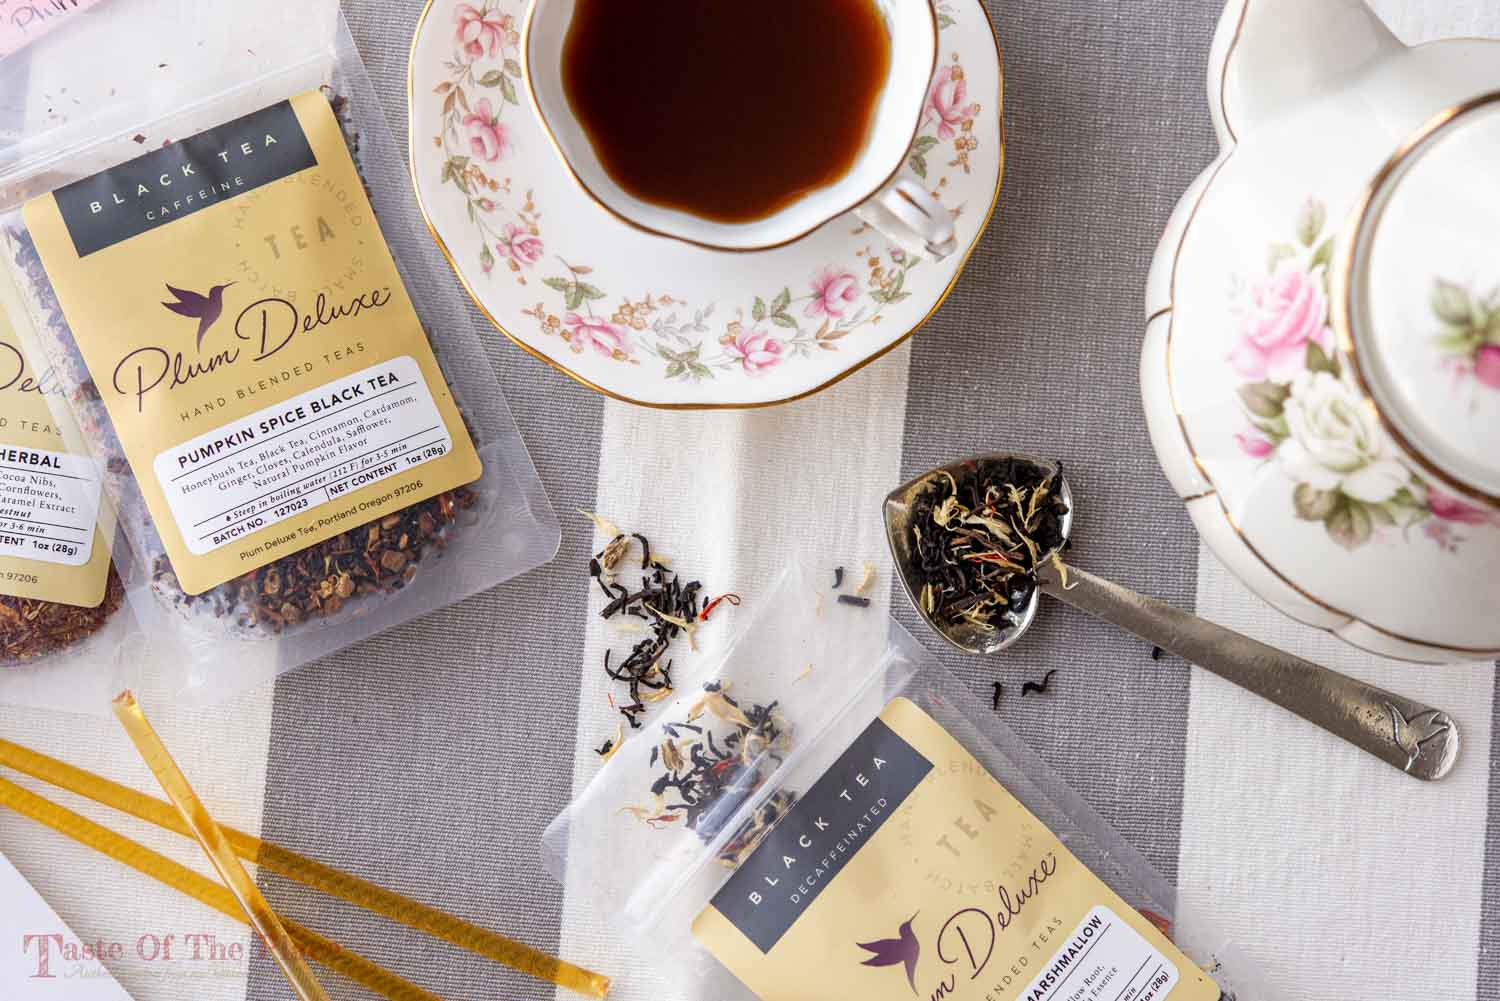 Selection of Plum Deluxe teas